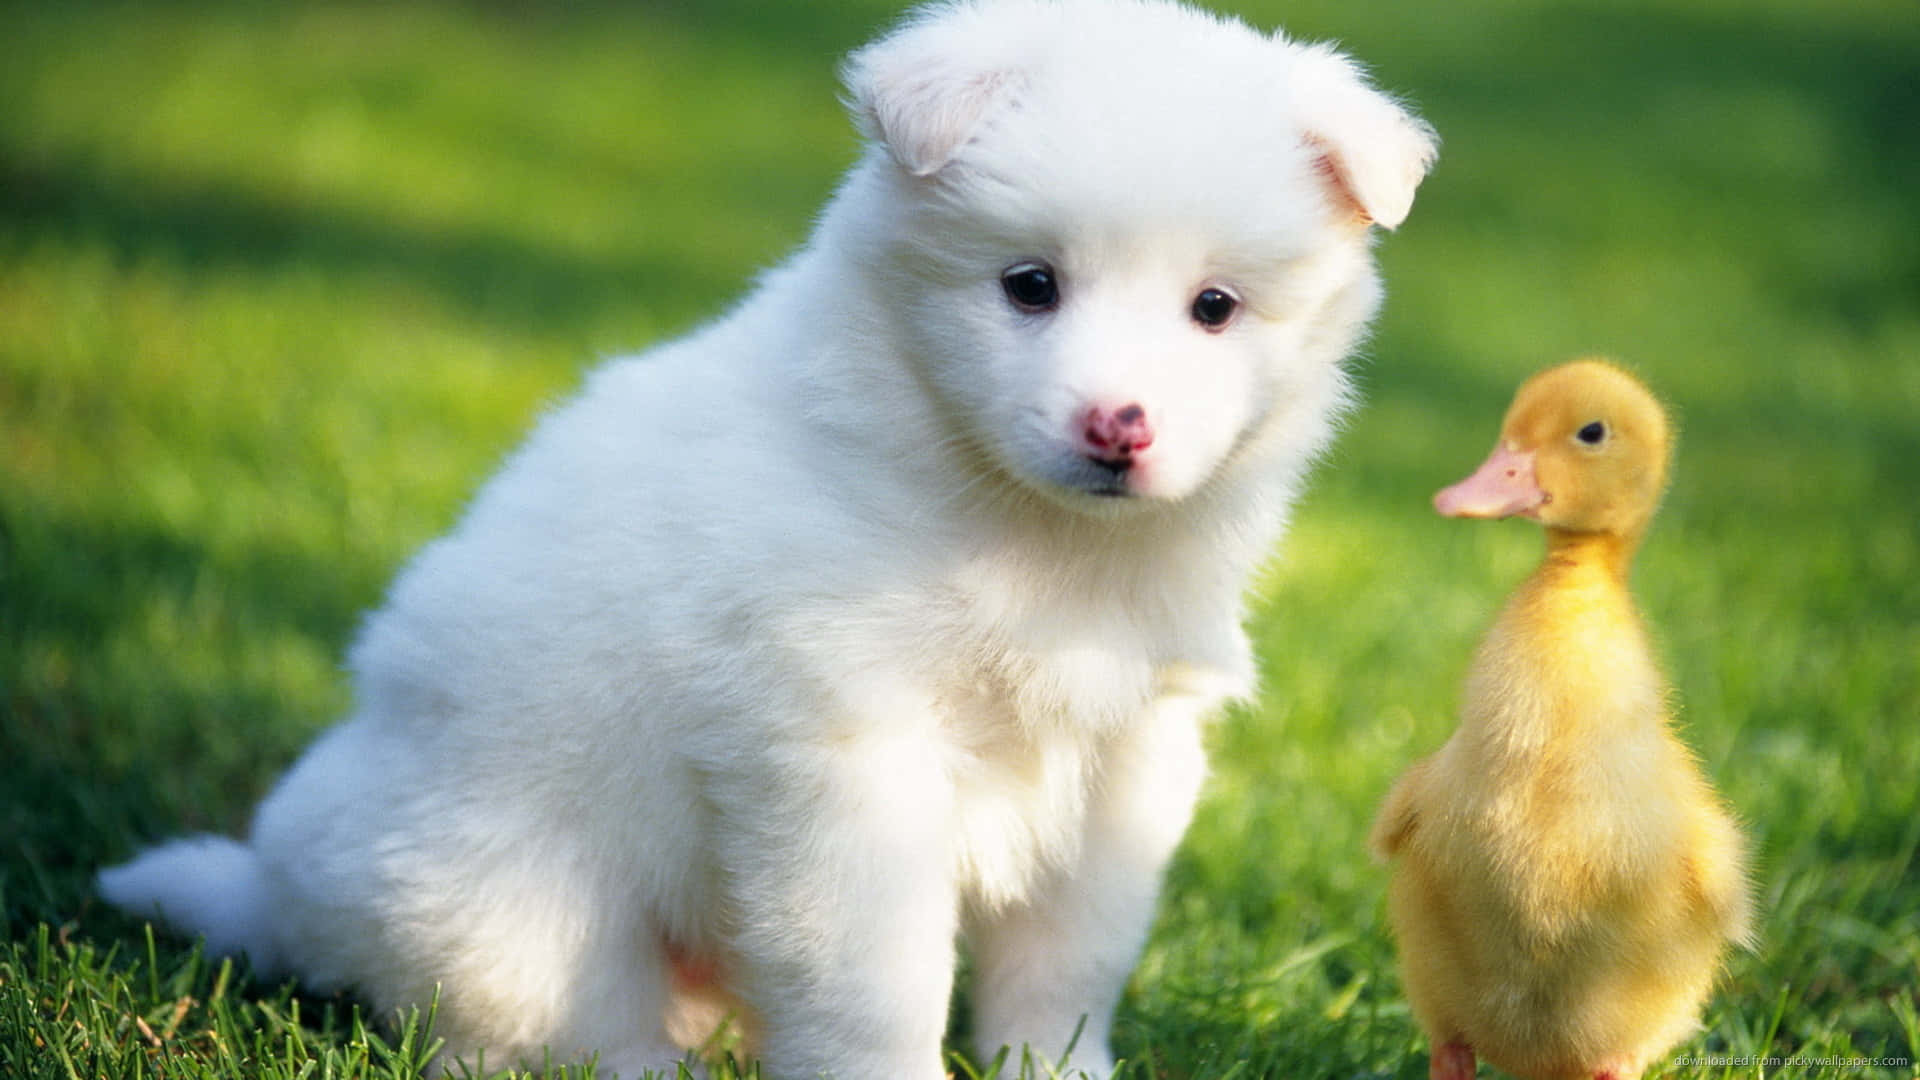 Cute Duck With A Puppy Background